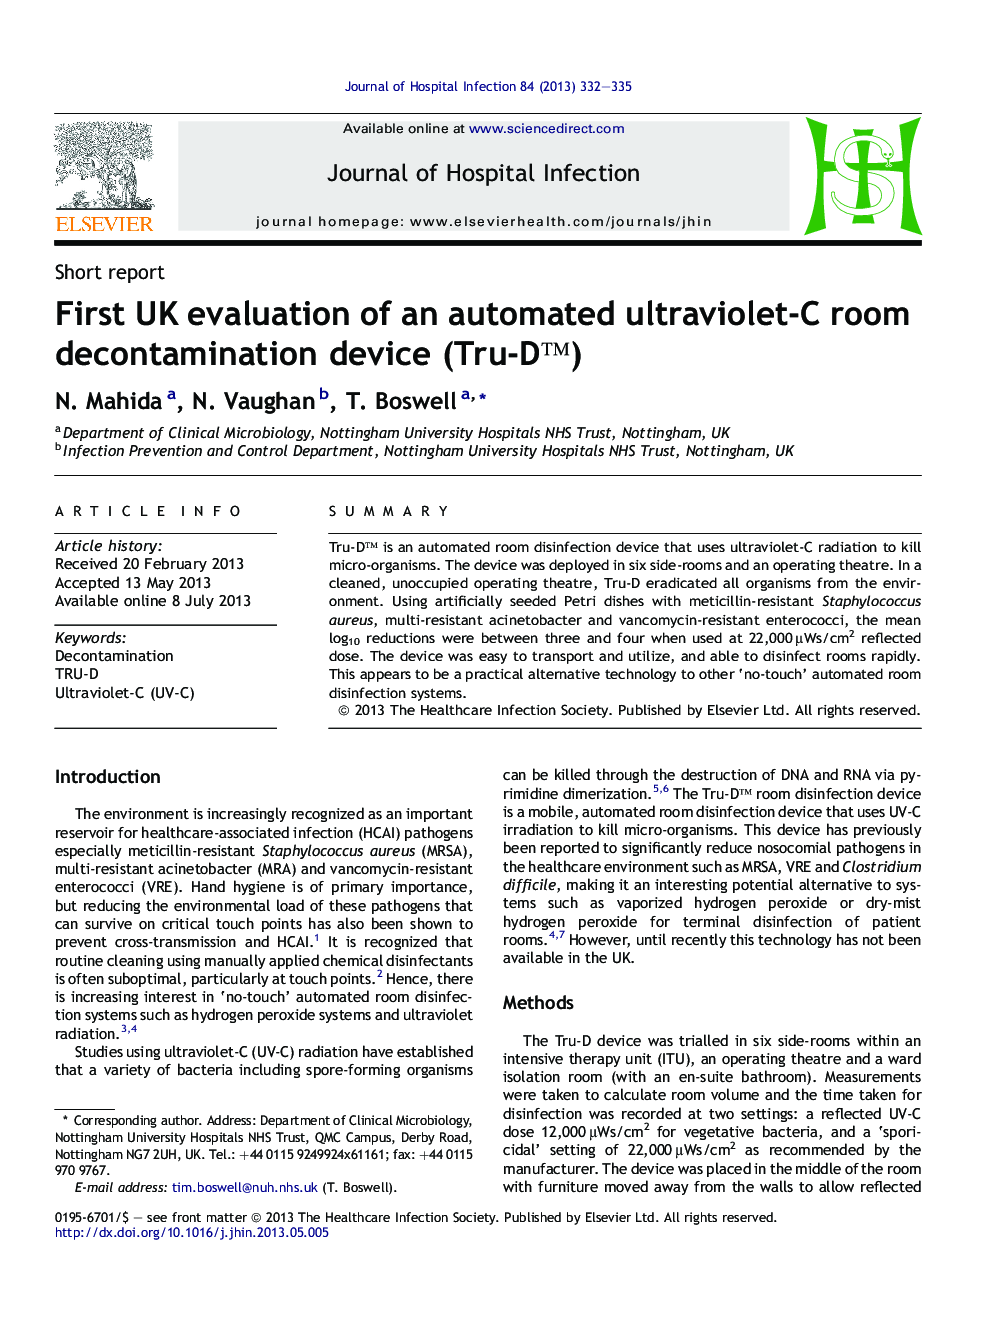 First UK evaluation of an automated ultraviolet-C room decontamination device (Tru-D™)